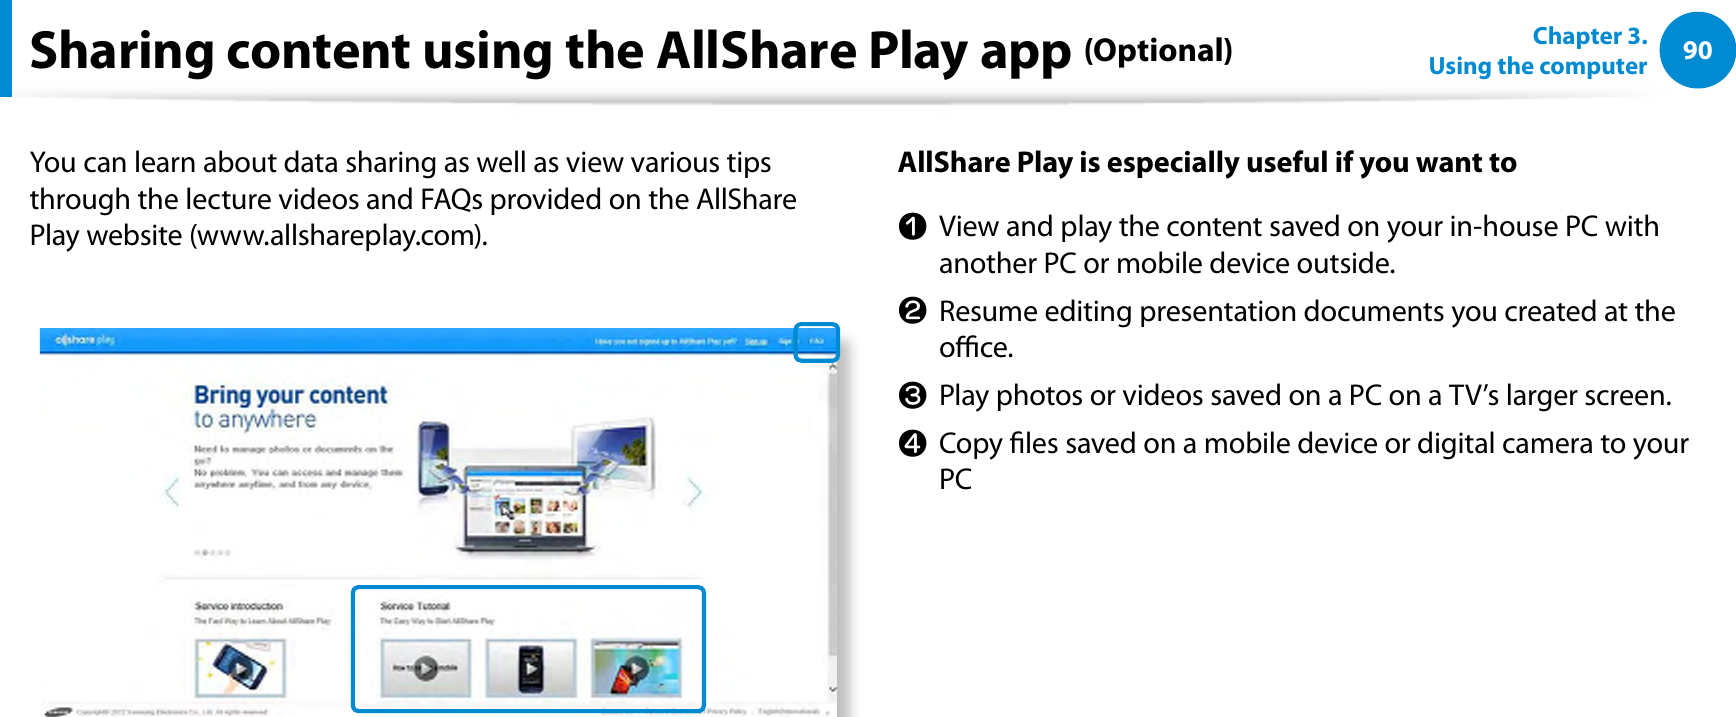 90Chapter 3.  Using the computerSharing content using the AllShare Play app (Optional)You can learn about data sharing as well as view various tips through the lecture videos and FAQs provided on the AllShare Play website (www.allshareplay.com).AllShare Play is especially useful if you want ton  View and play the content saved on your in-house PC with another PC or mobile device outside.l  Resume editing presentation documents you created at the oce.W  Play photos or videos saved on a PC on a TV’s larger screen.j  Copy les saved on a mobile device or digital camera to your PC